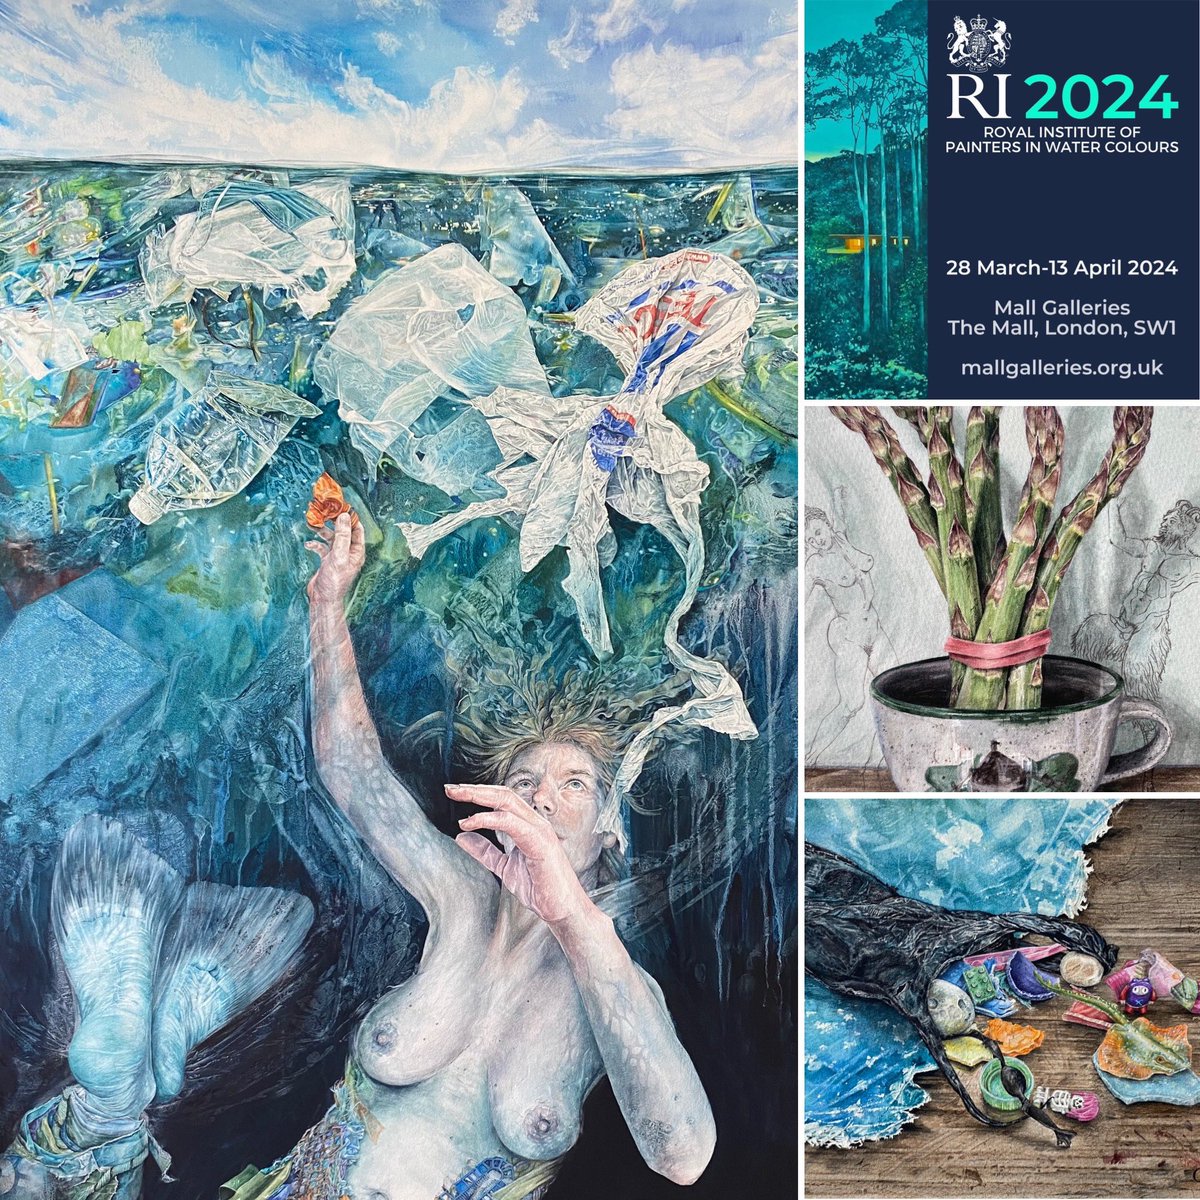 Last week of the 212th Annual #Exhibition of @RIwatercolours @mallgalleries , closes 13 April. #exhibition #exhibitingartist #watercolourartist #clairesparkes #watercolours #adrift #mermaidspurse #asparagustips #acorncup #stilllife #plasticpollution #figurative #narrativeart